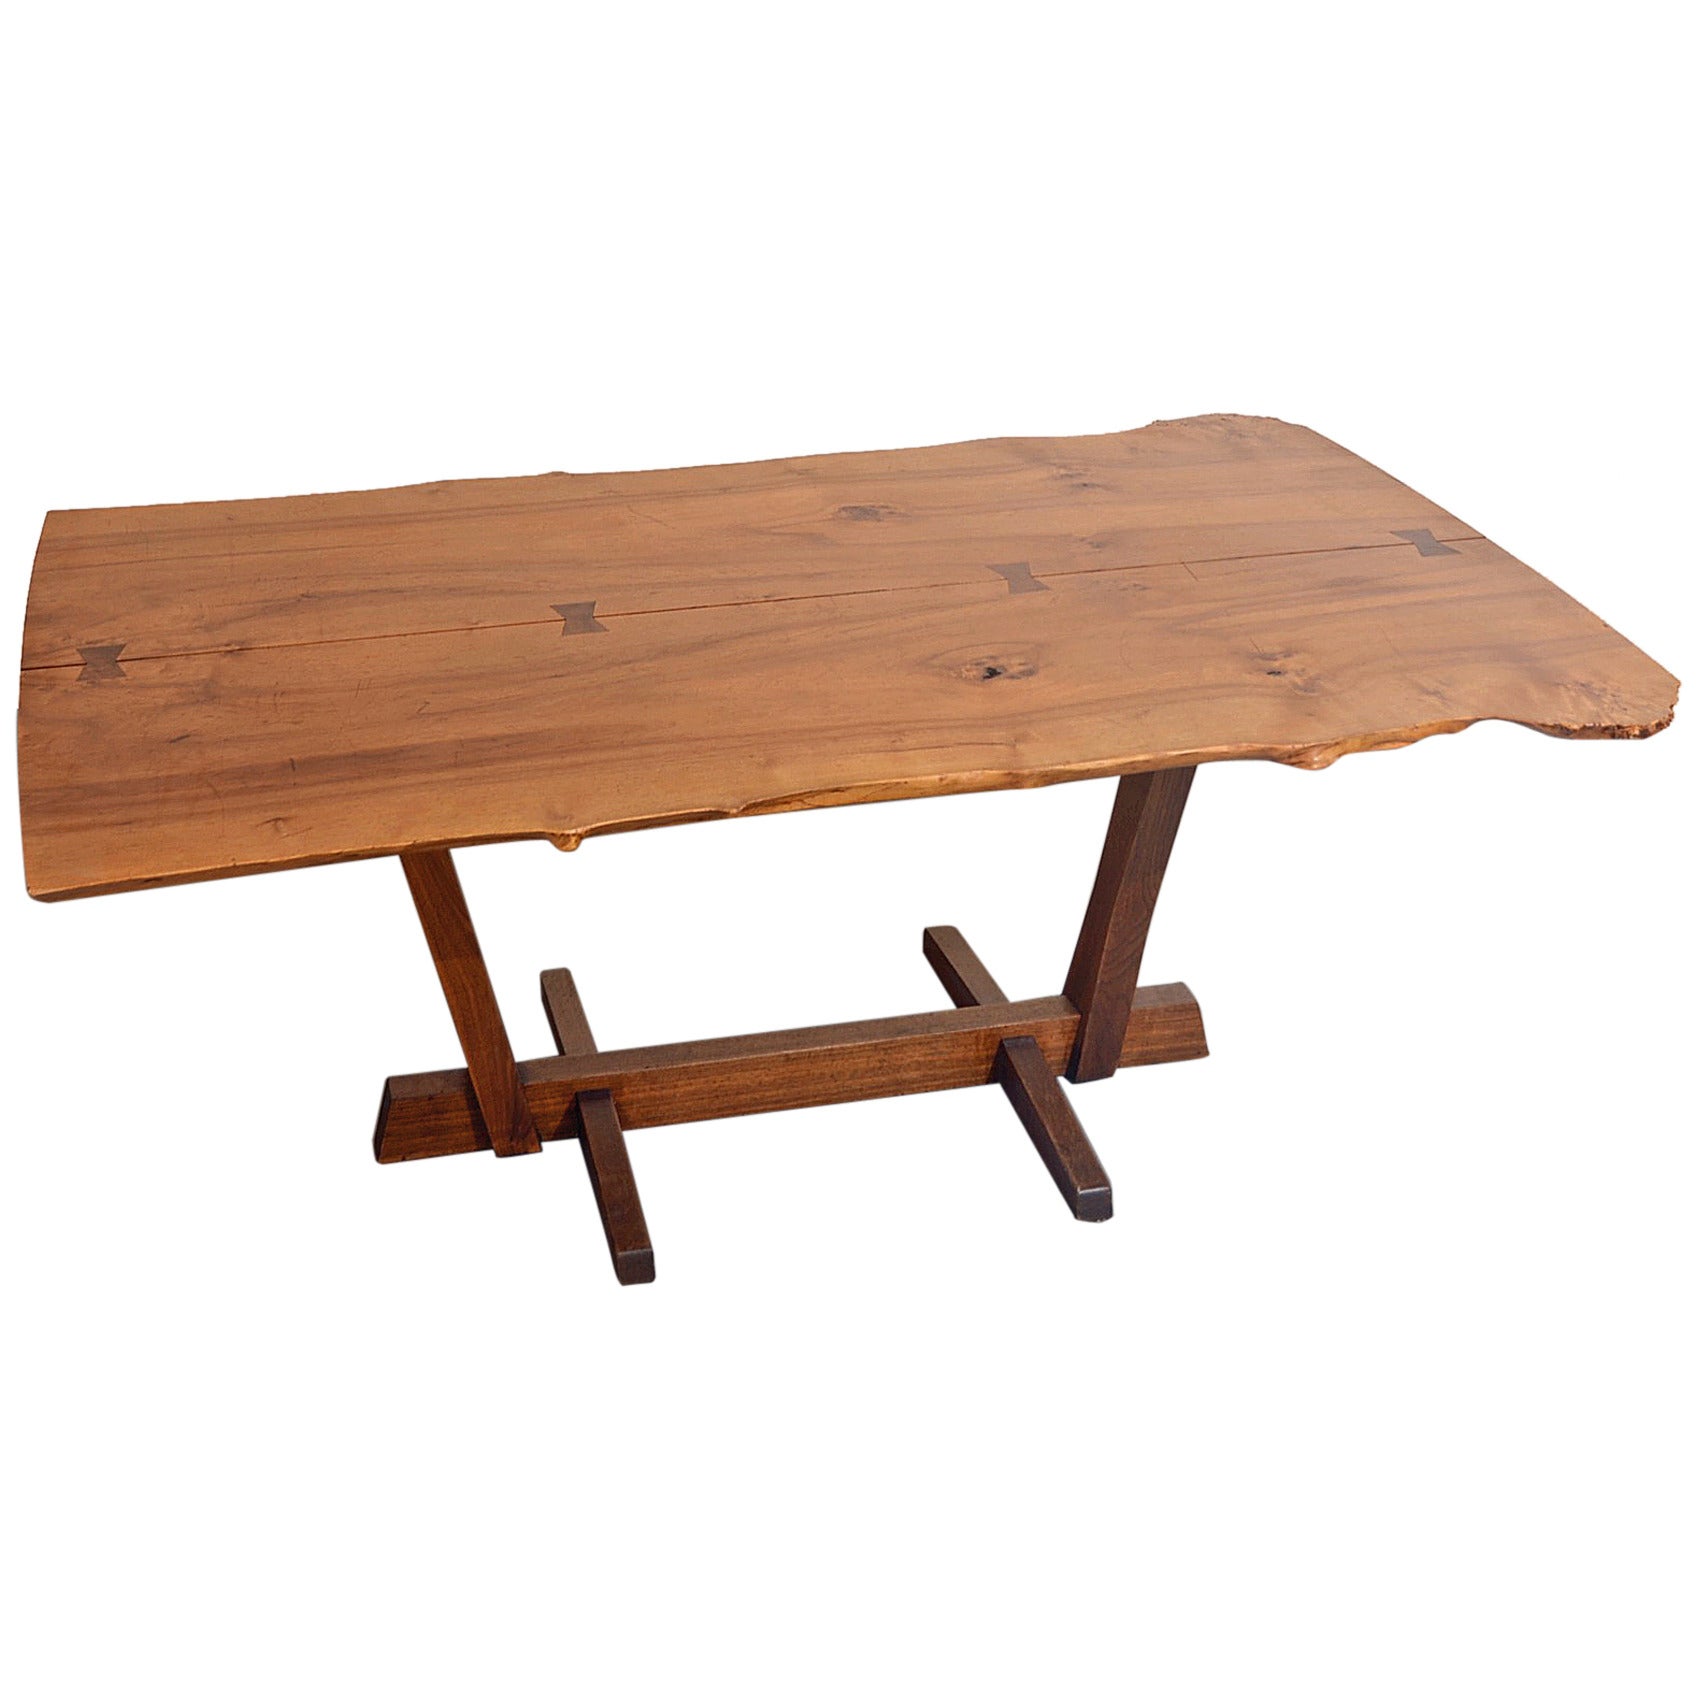 Rare Bloody Birch Conoid Dining Table by George Nakashima, 1975 For Sale